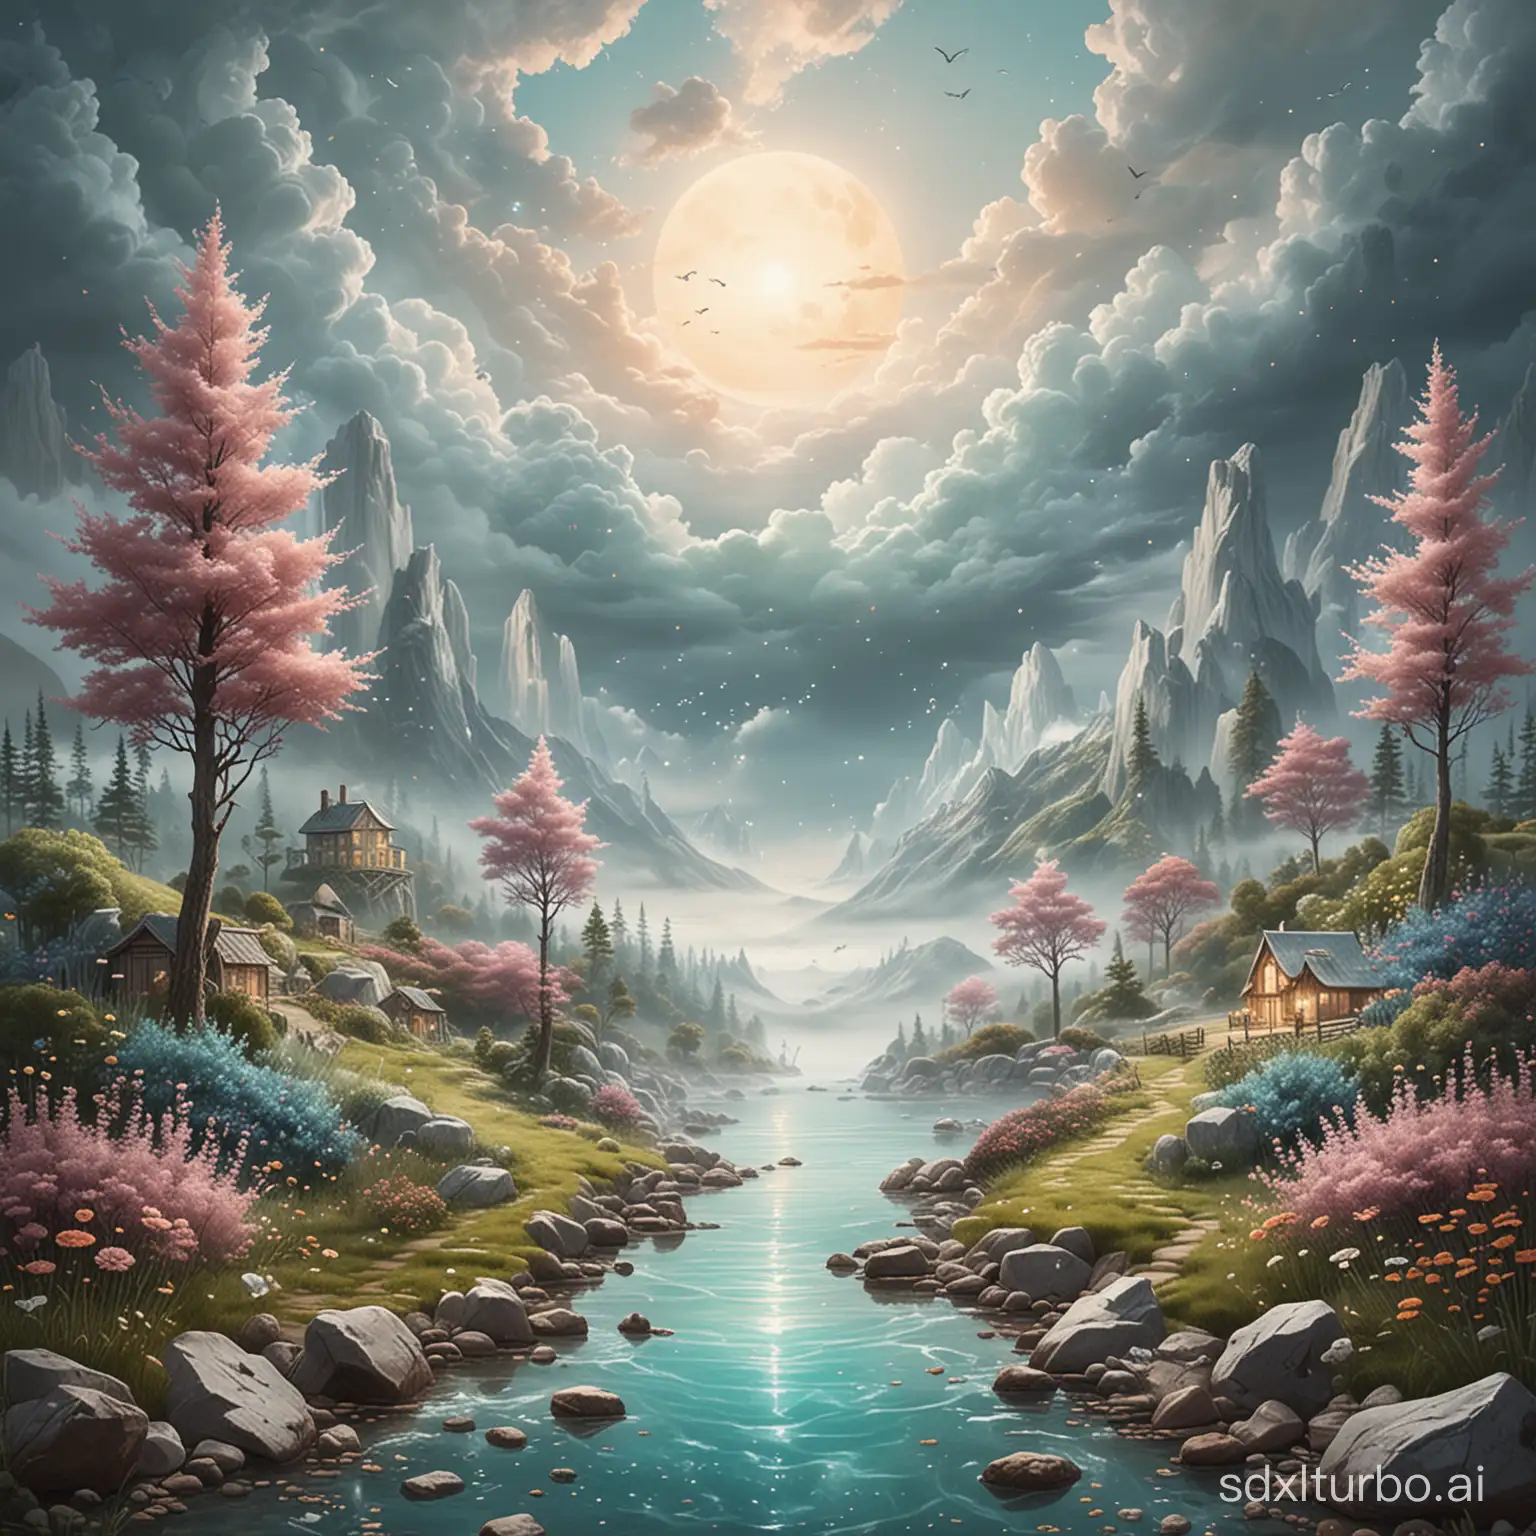 Dreamy healing landscapes, depicting real scenes and objects in a dreamy and healing style